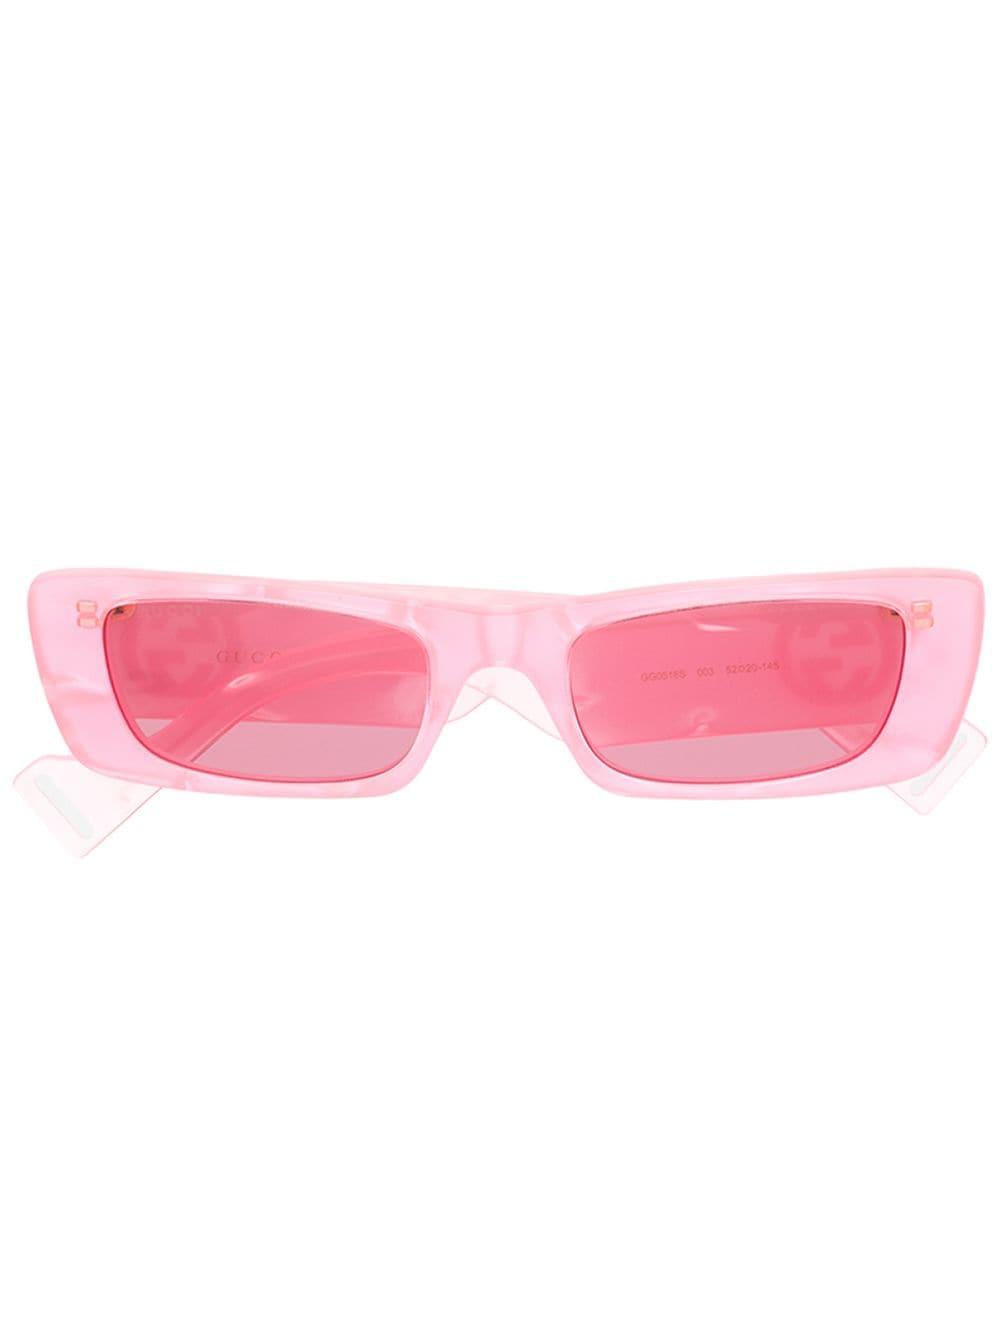 Gucci Rectangle Frame Sunglasses in Pink | Lyst